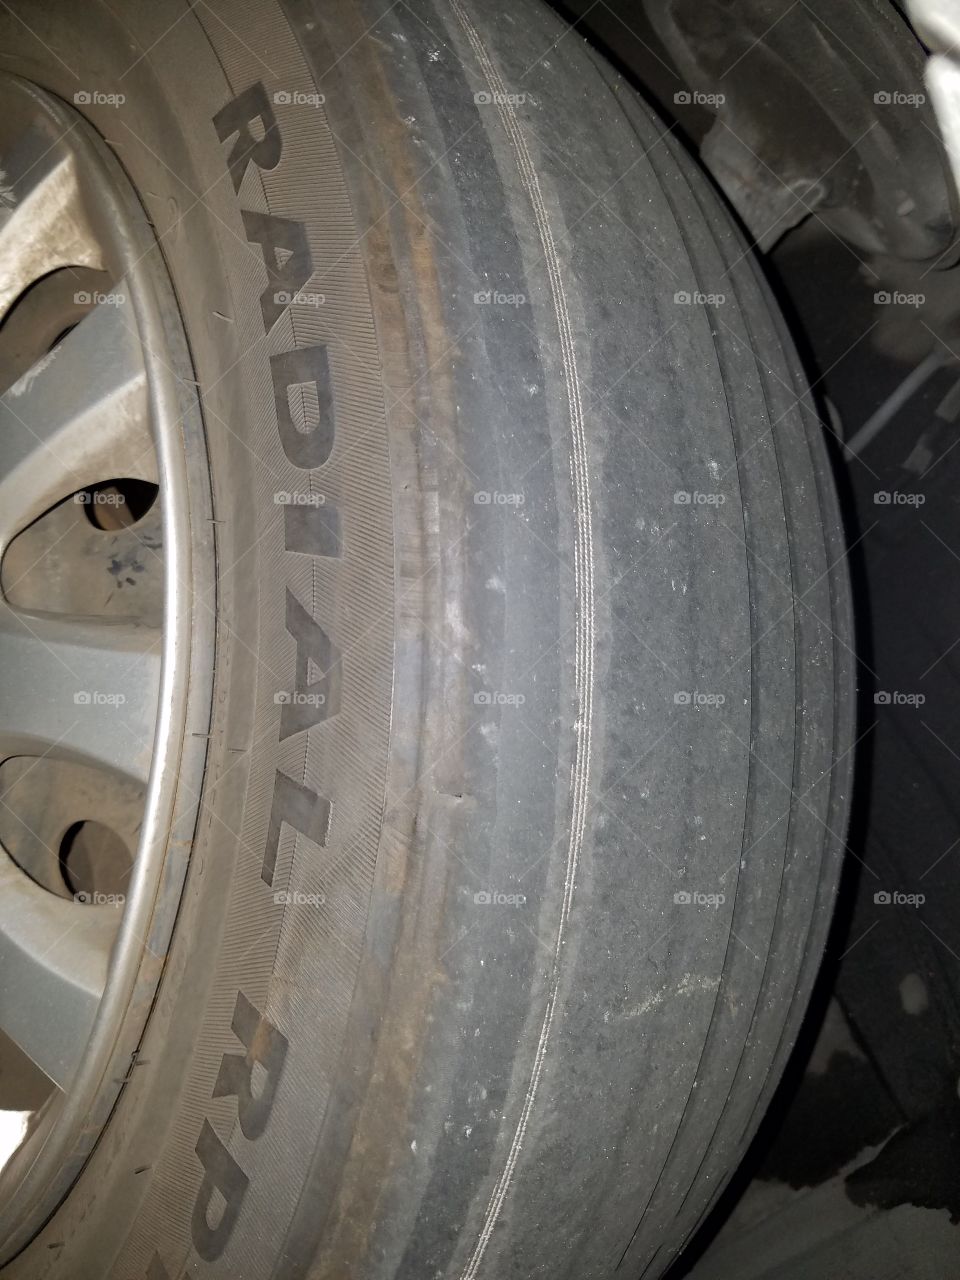 Steel on Worn Out Tire